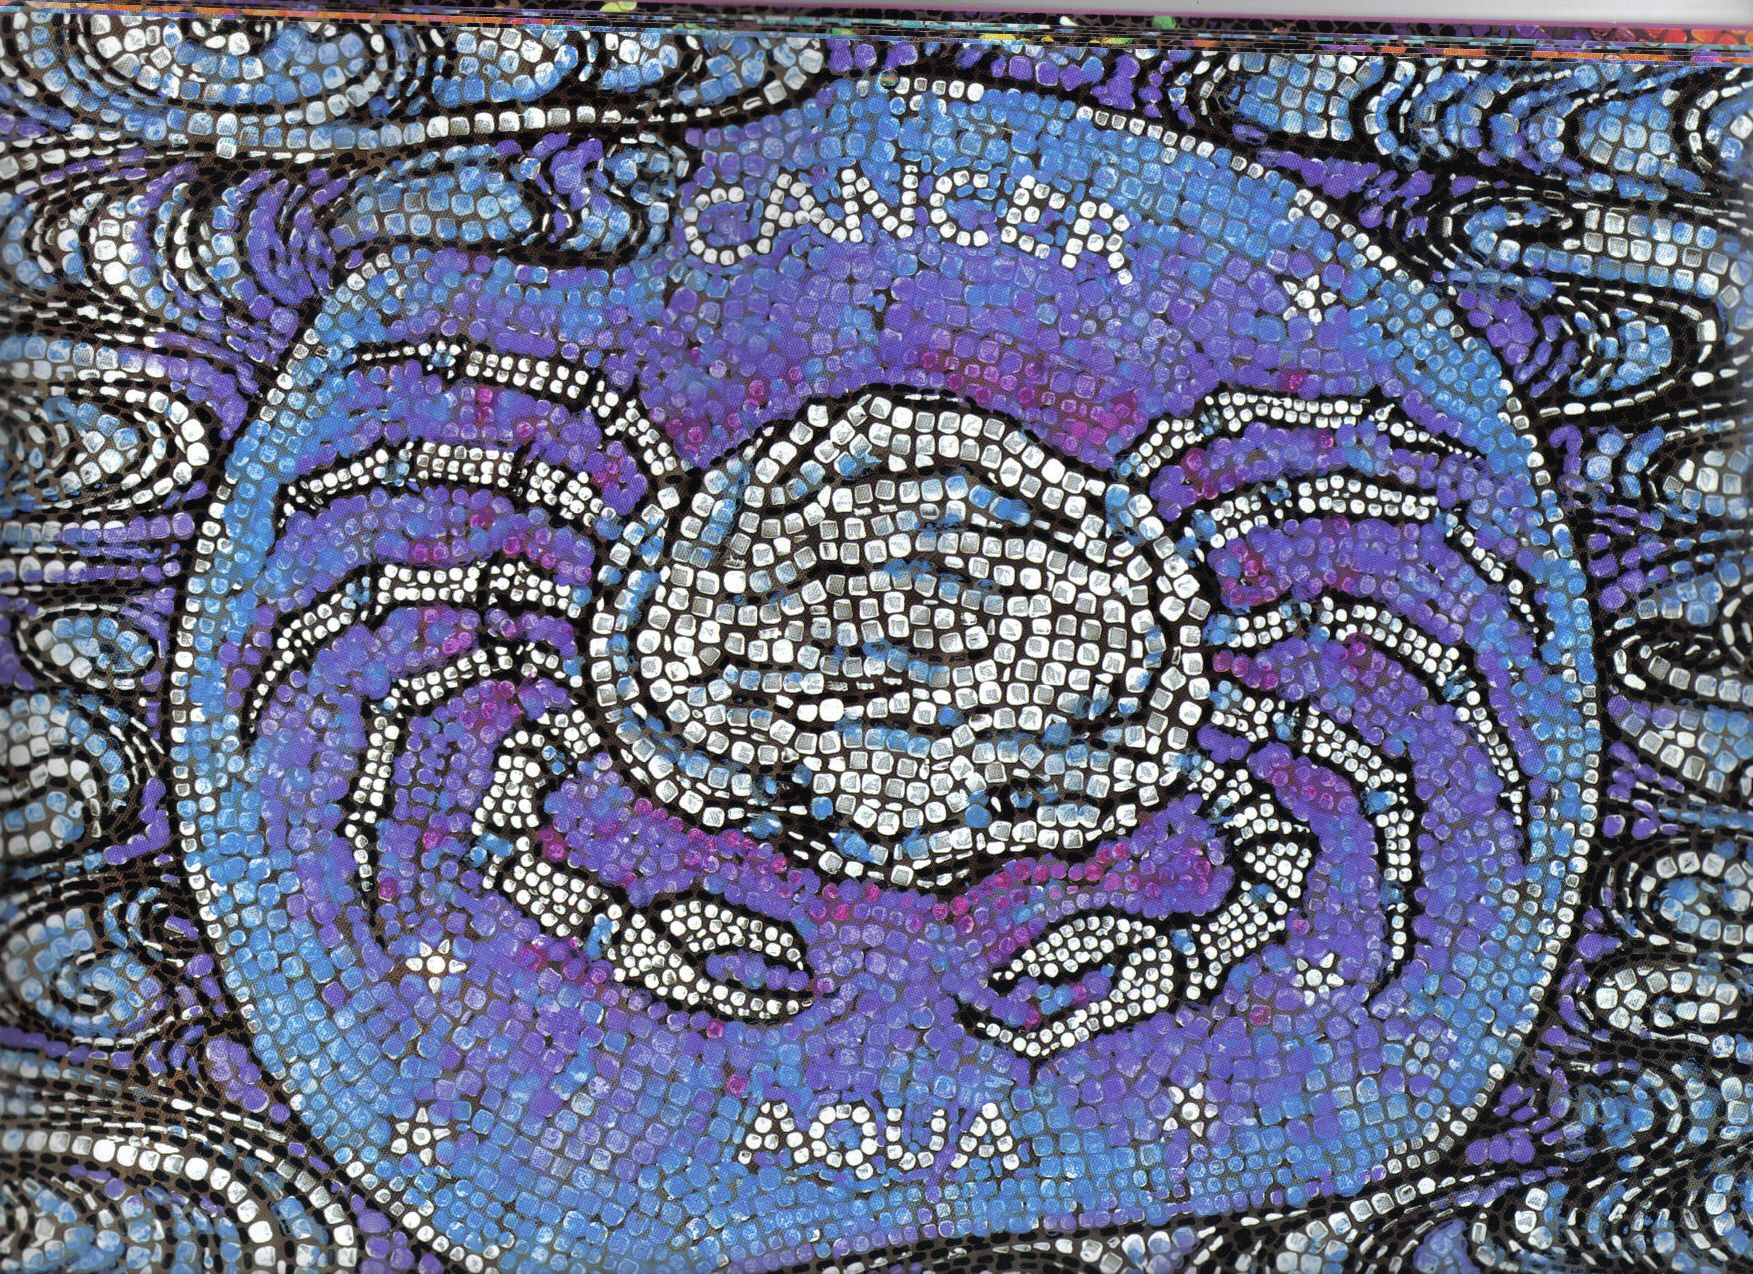 Cancer, mosaic wallpaper and image, picture, photo